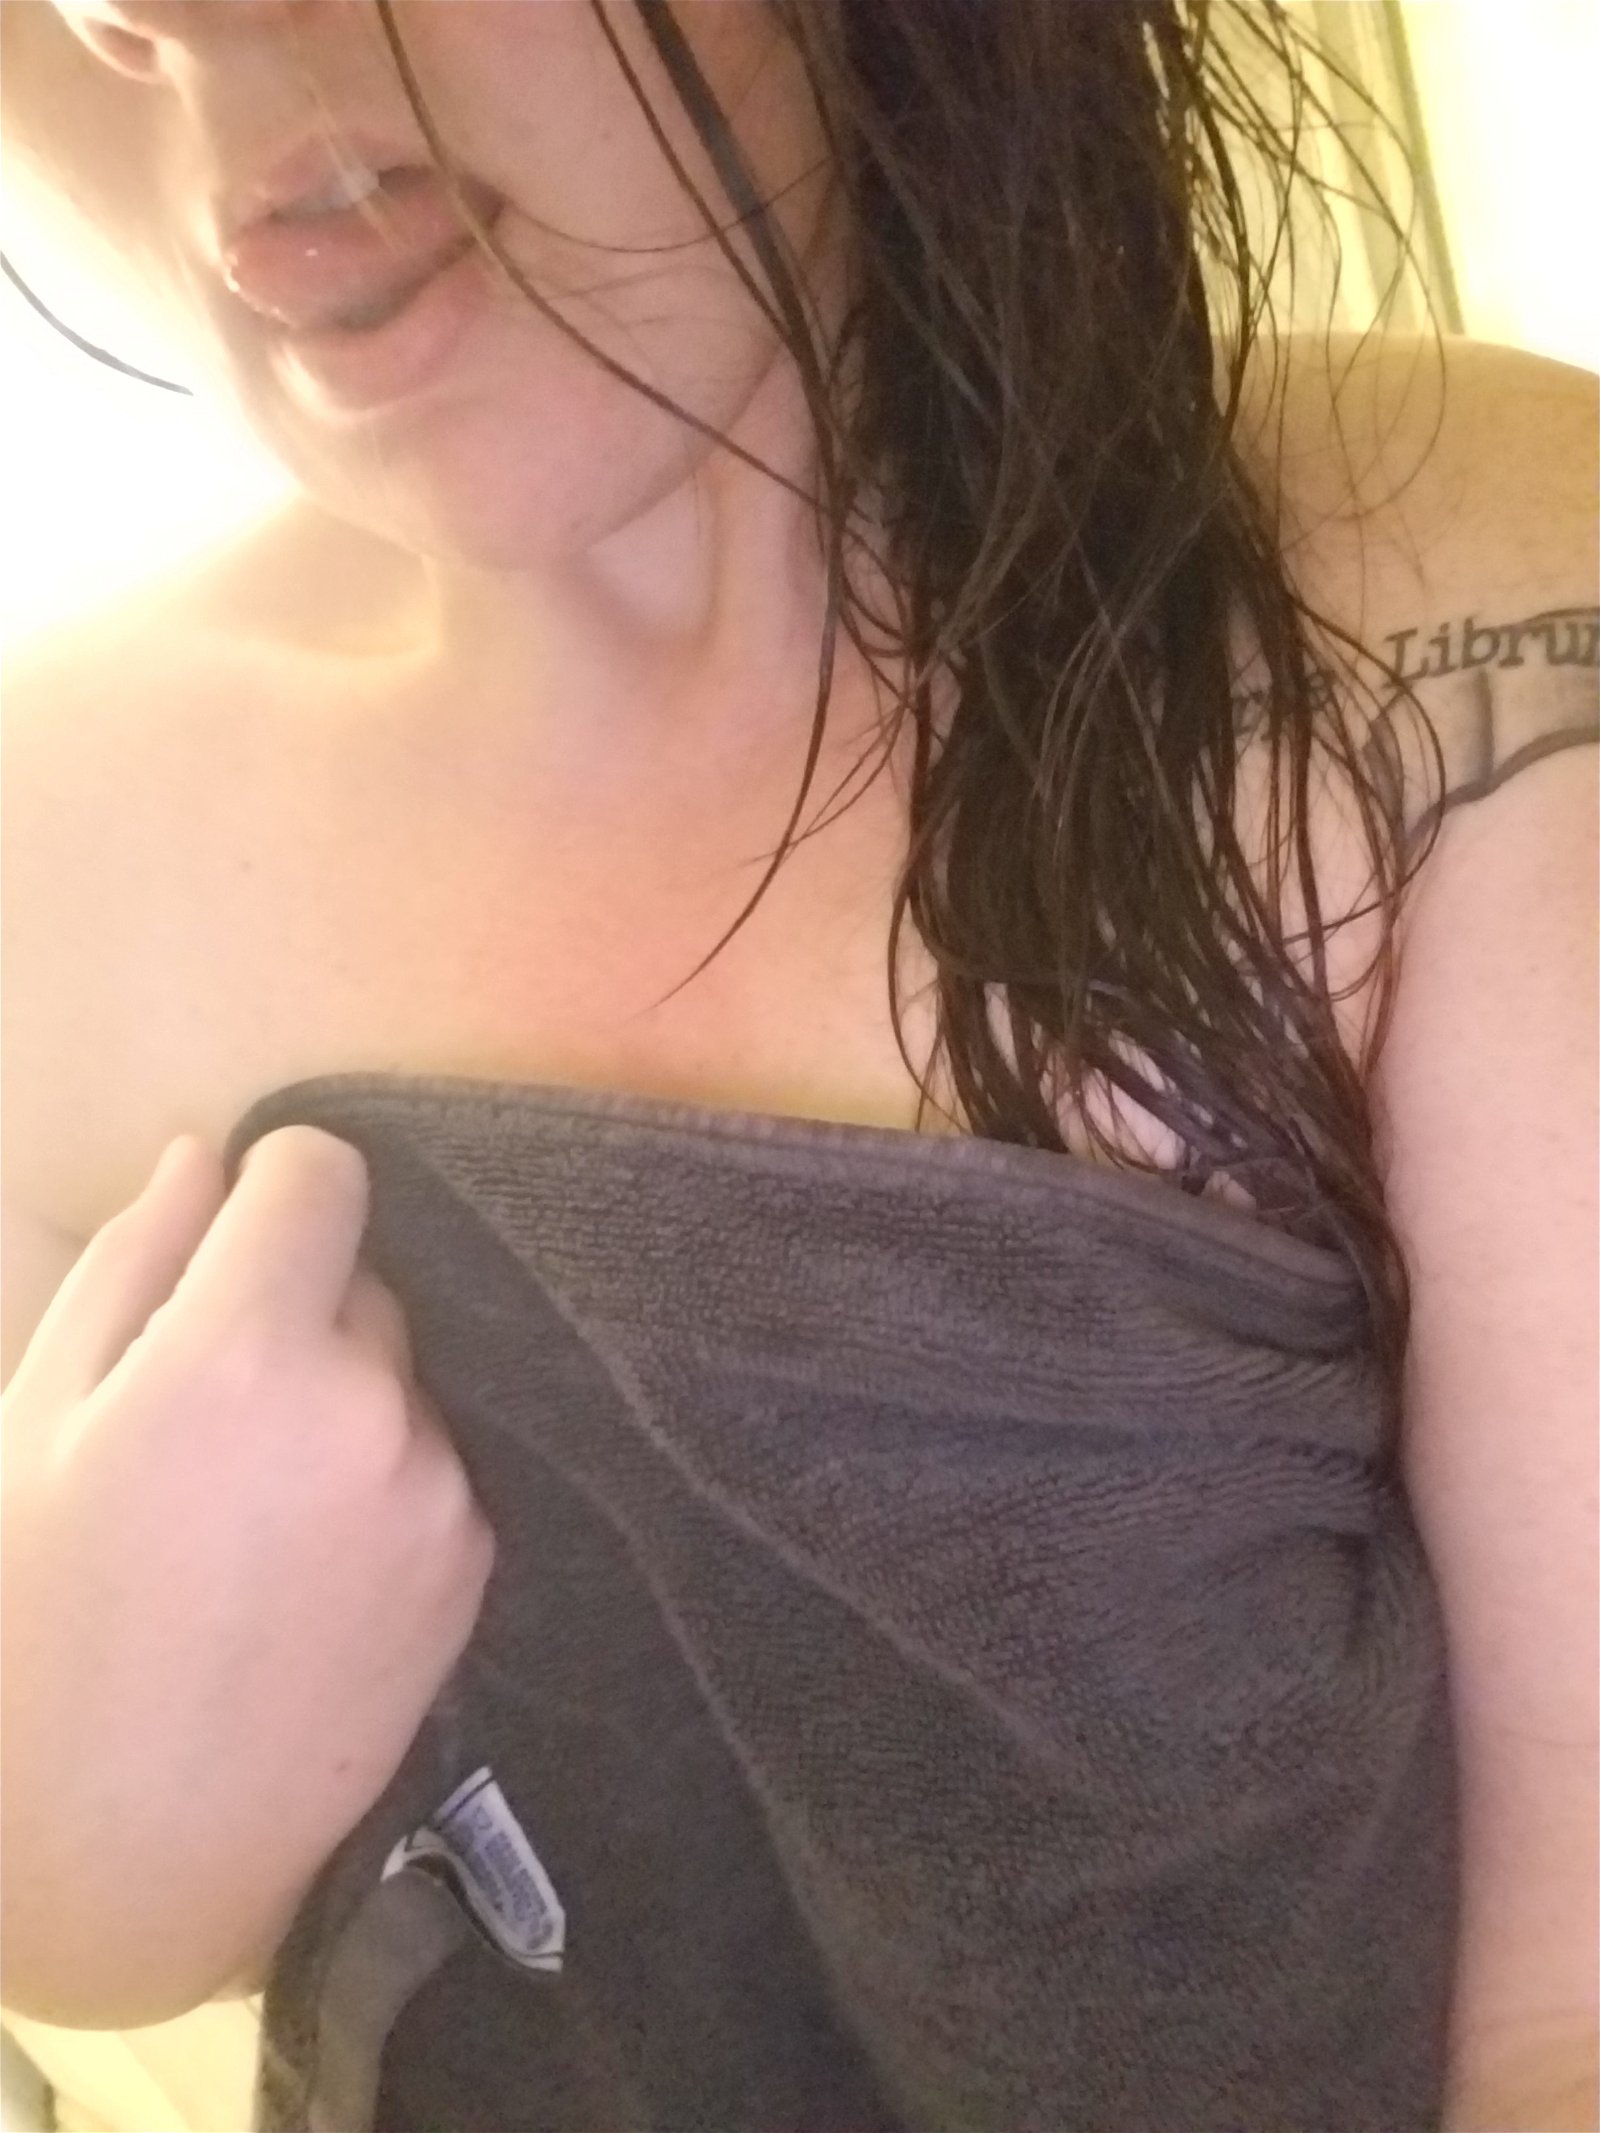 Photo by Cumslut92 with the username @Cumslut92,  May 14, 2020 at 3:37 PM. The post is about the topic MILF and the text says 'fresh out the shower.

#showertease #teaseme #comeplaywithme'